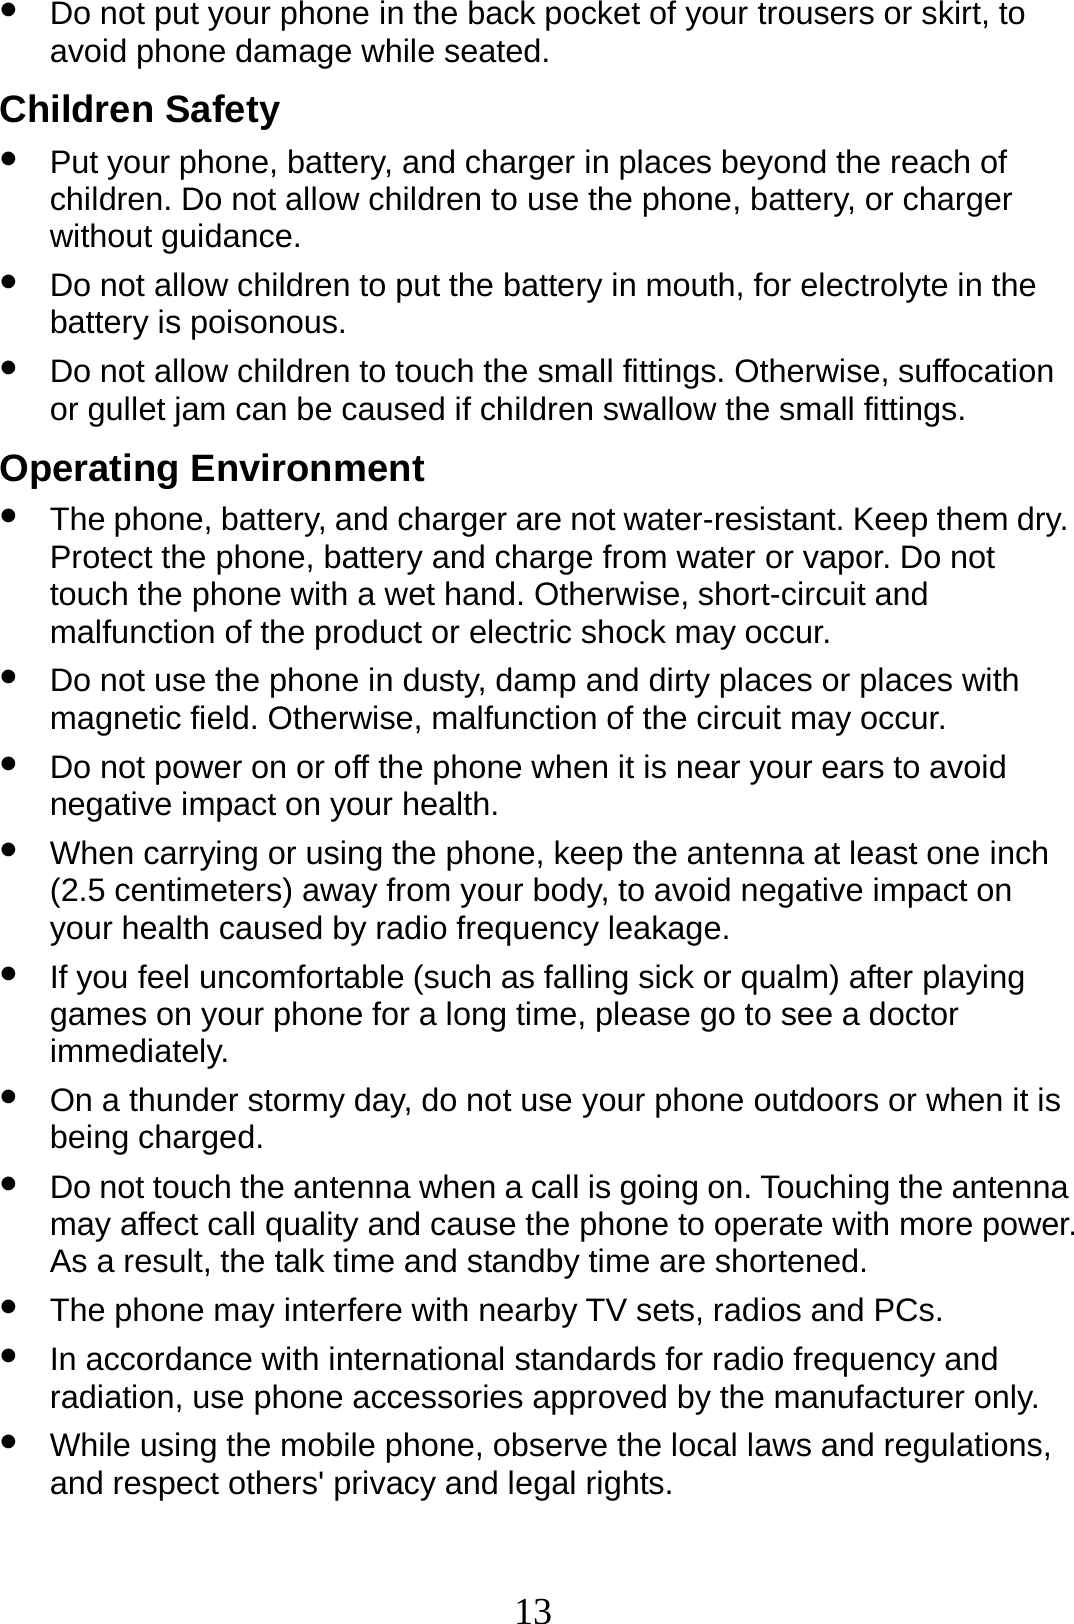 13 z Do not put your phone in the back pocket of your trousers or skirt, to avoid phone damage while seated. Children Safety z Put your phone, battery, and charger in places beyond the reach of children. Do not allow children to use the phone, battery, or charger without guidance. z Do not allow children to put the battery in mouth, for electrolyte in the battery is poisonous. z Do not allow children to touch the small fittings. Otherwise, suffocation or gullet jam can be caused if children swallow the small fittings. Operating Environment z The phone, battery, and charger are not water-resistant. Keep them dry. Protect the phone, battery and charge from water or vapor. Do not touch the phone with a wet hand. Otherwise, short-circuit and malfunction of the product or electric shock may occur. z Do not use the phone in dusty, damp and dirty places or places with magnetic field. Otherwise, malfunction of the circuit may occur. z Do not power on or off the phone when it is near your ears to avoid negative impact on your health. z When carrying or using the phone, keep the antenna at least one inch (2.5 centimeters) away from your body, to avoid negative impact on your health caused by radio frequency leakage. z If you feel uncomfortable (such as falling sick or qualm) after playing games on your phone for a long time, please go to see a doctor immediately. z On a thunder stormy day, do not use your phone outdoors or when it is being charged. z Do not touch the antenna when a call is going on. Touching the antenna may affect call quality and cause the phone to operate with more power. As a result, the talk time and standby time are shortened. z The phone may interfere with nearby TV sets, radios and PCs. z In accordance with international standards for radio frequency and radiation, use phone accessories approved by the manufacturer only. z While using the mobile phone, observe the local laws and regulations, and respect others&apos; privacy and legal rights. 